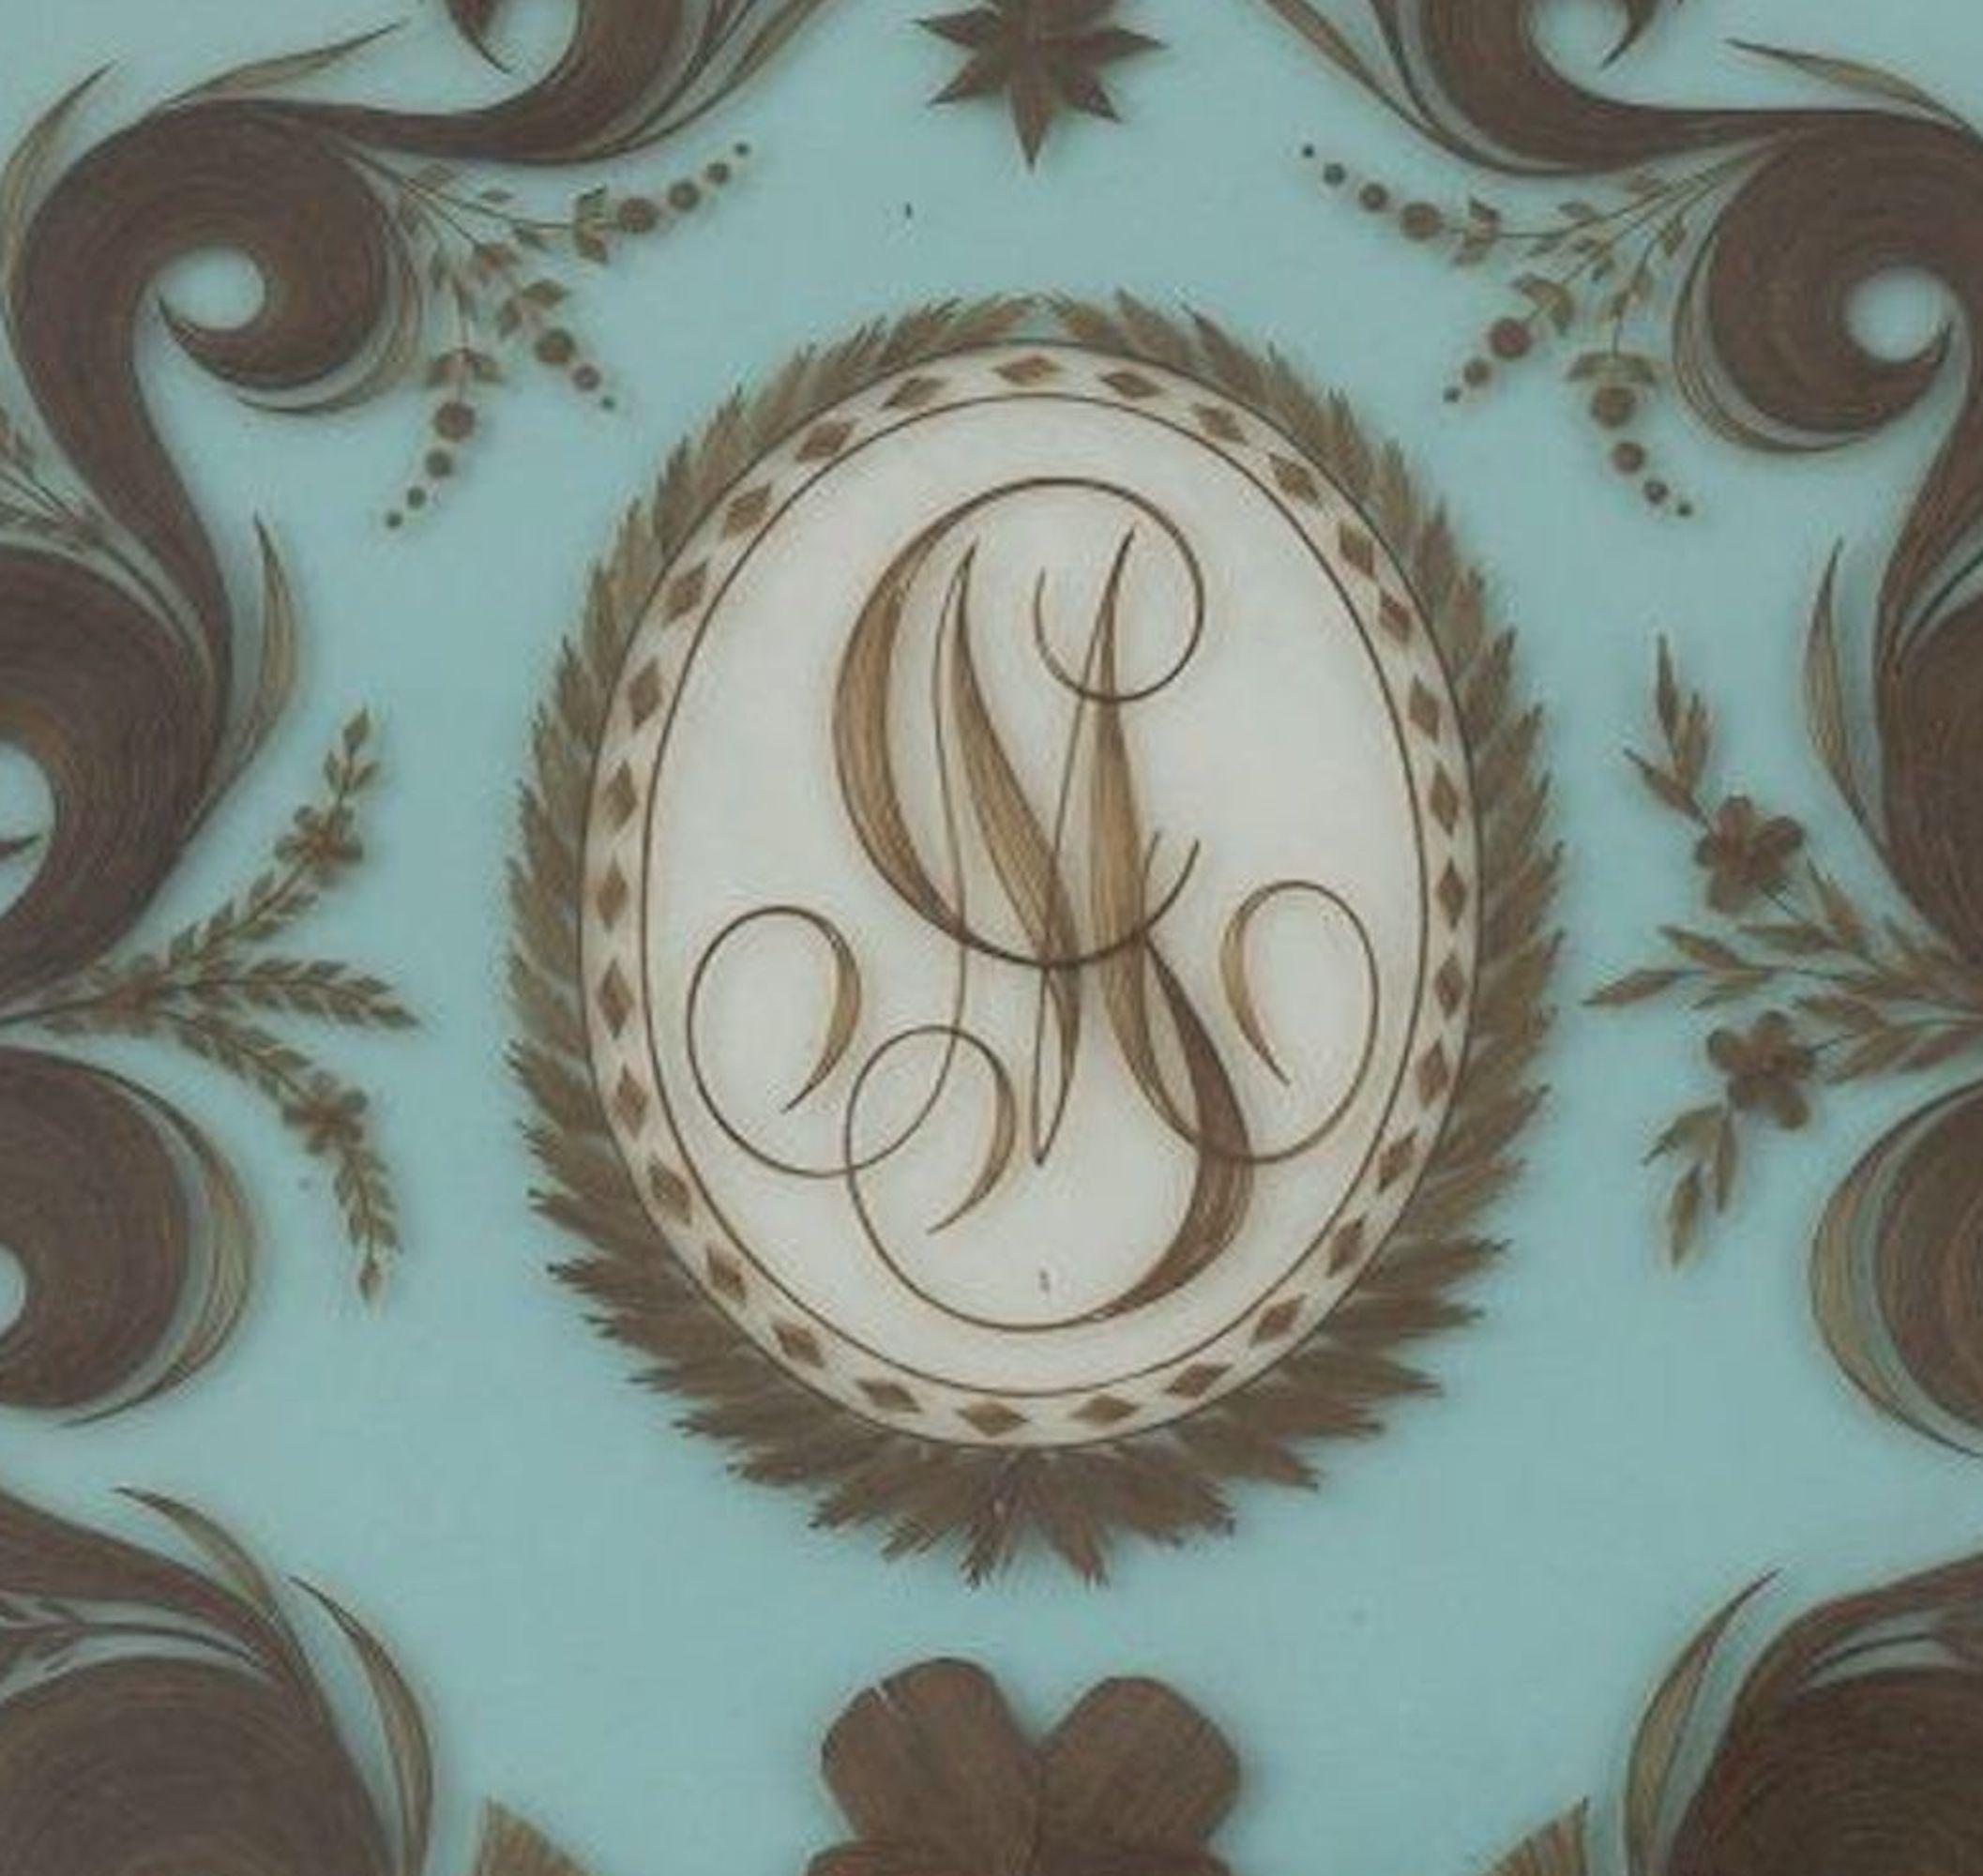 This is Manlio Garibaldi Monogram, a rare decorative object realized in Italy in 1874.

This important artwork represents the monogram MG of Manlio Garibaldi, the minor son of the famous general Giuseppe Garibaldi. Made with the young Manlio's